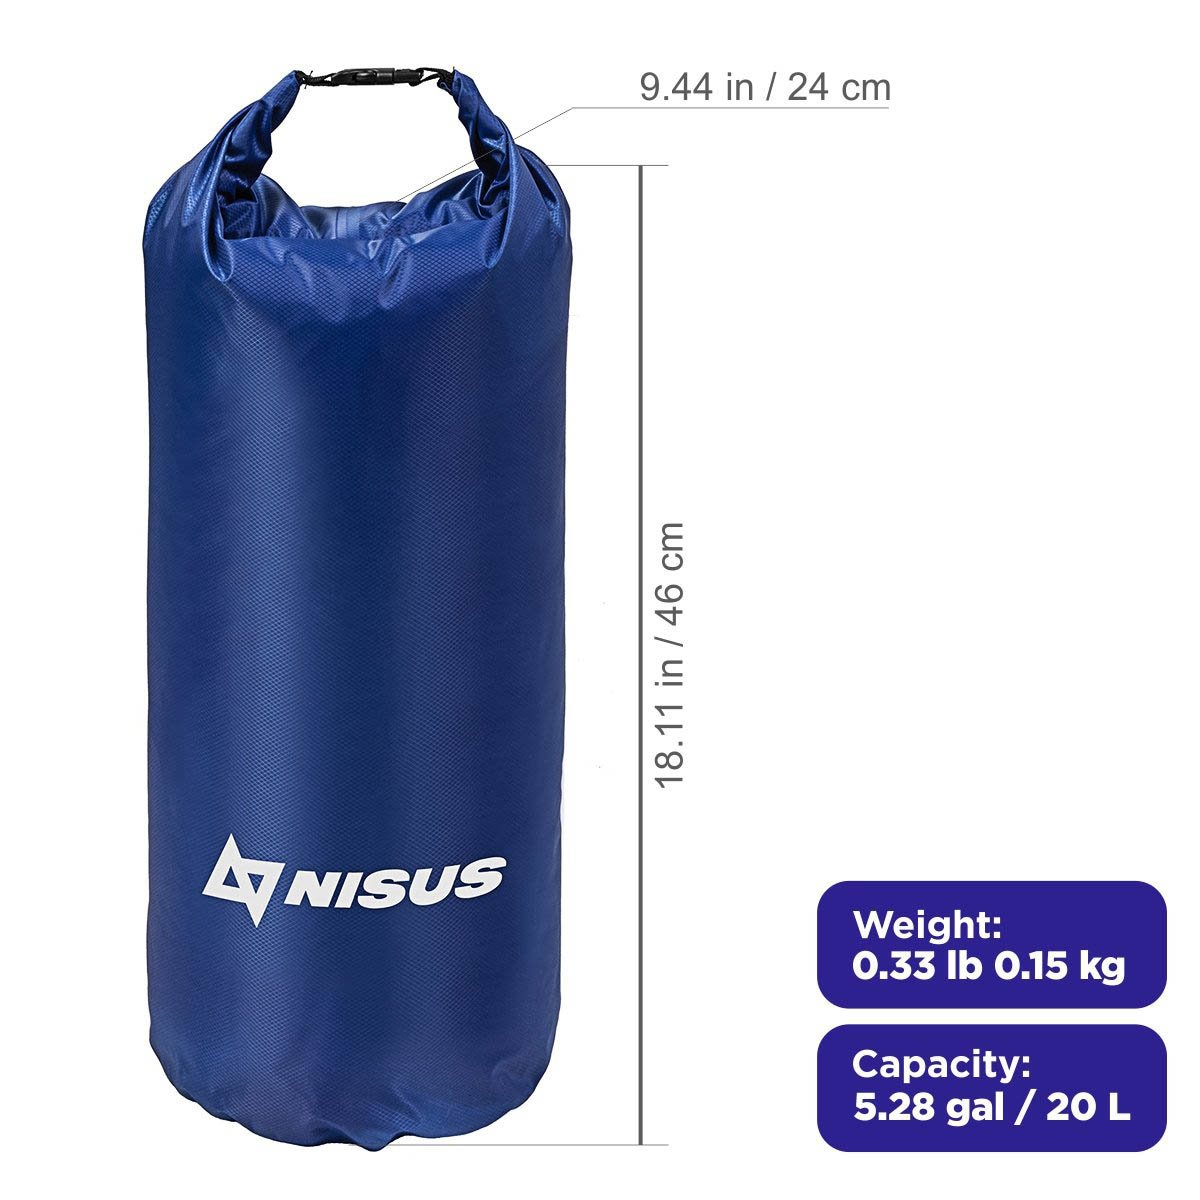 20 L Blue Polyester Waterproof Dry Bag for Fishing, Kayaking is 18.11 inches high, weighing 0.33 lbs